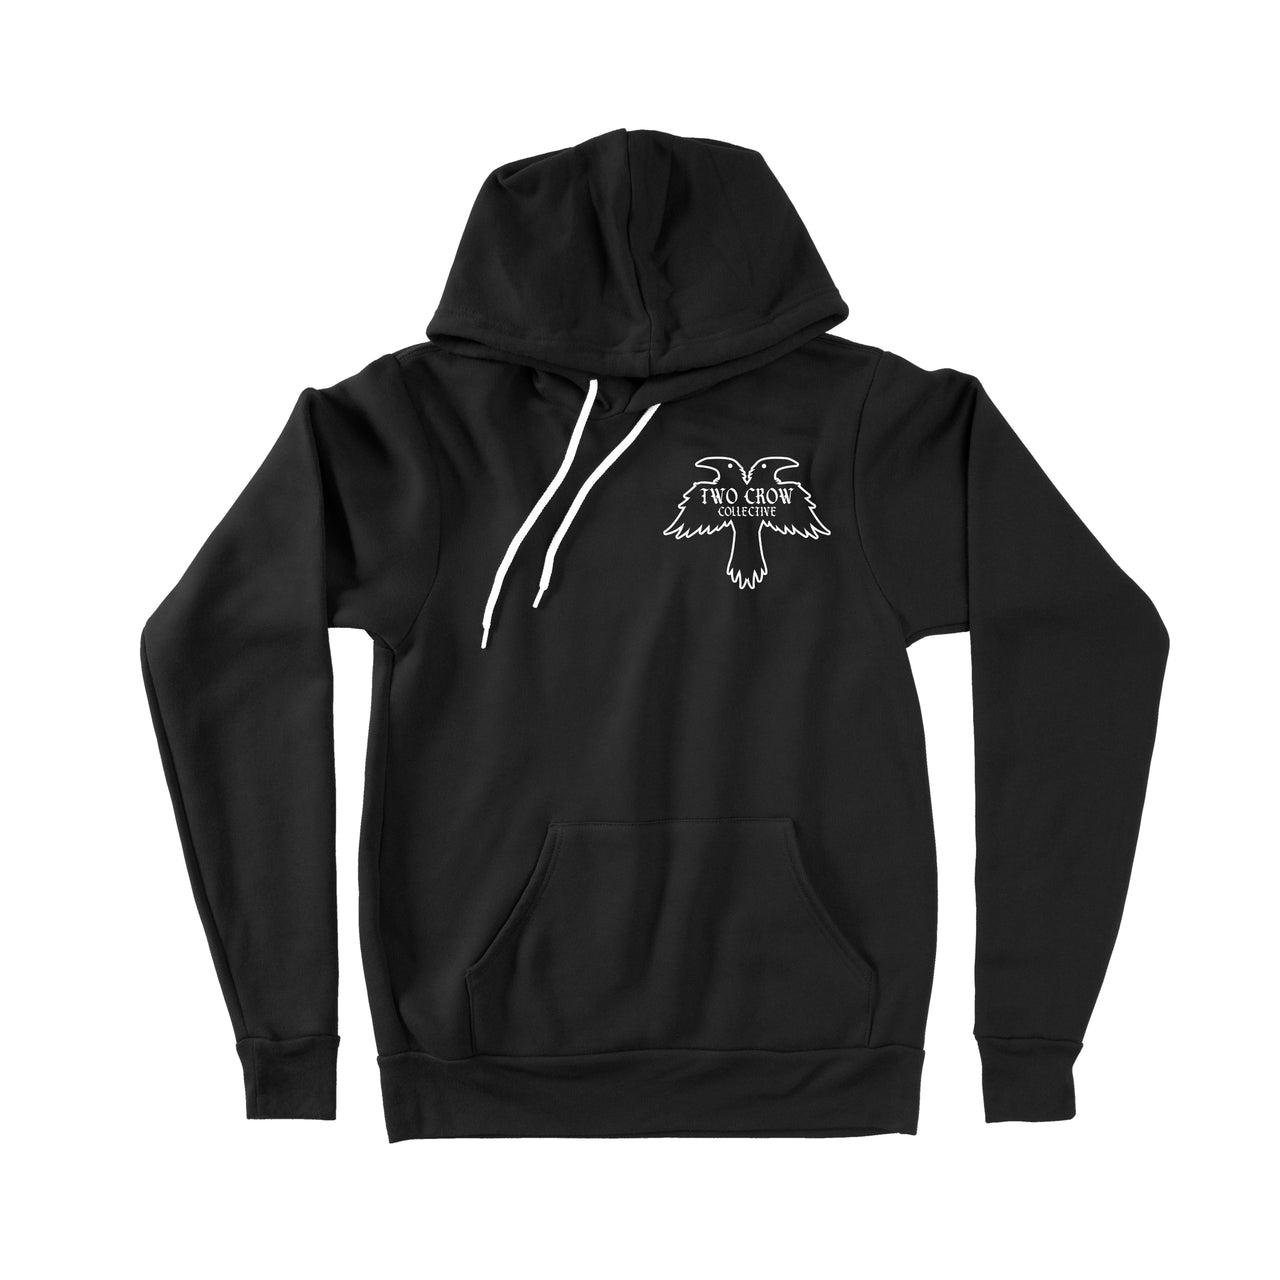 Outshine Your Darkness Hoodie